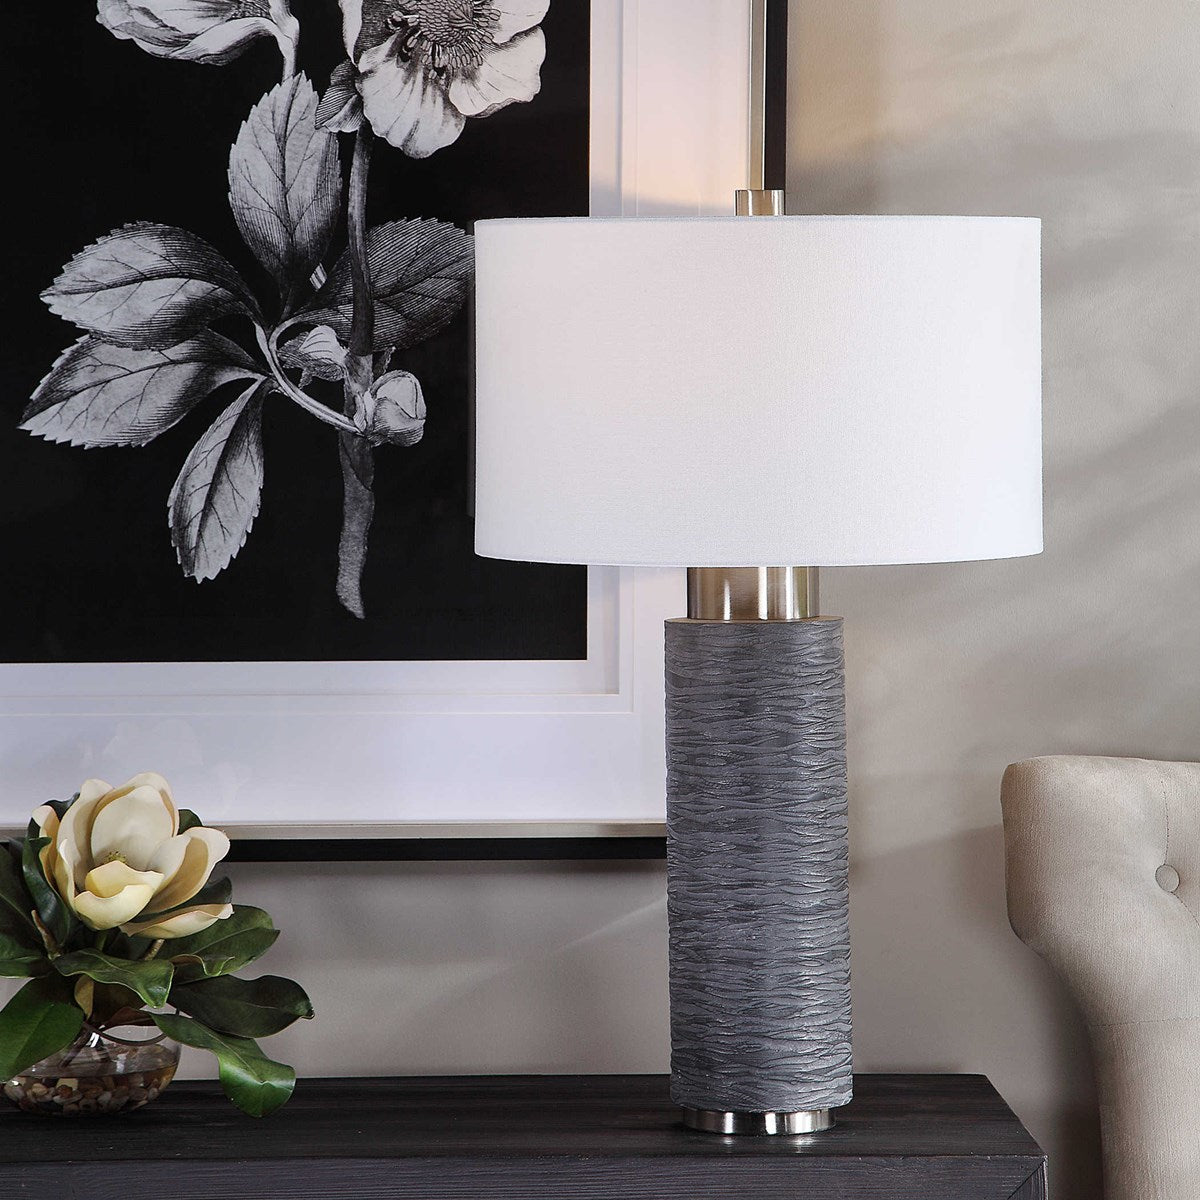 Strathmore Table Lamp